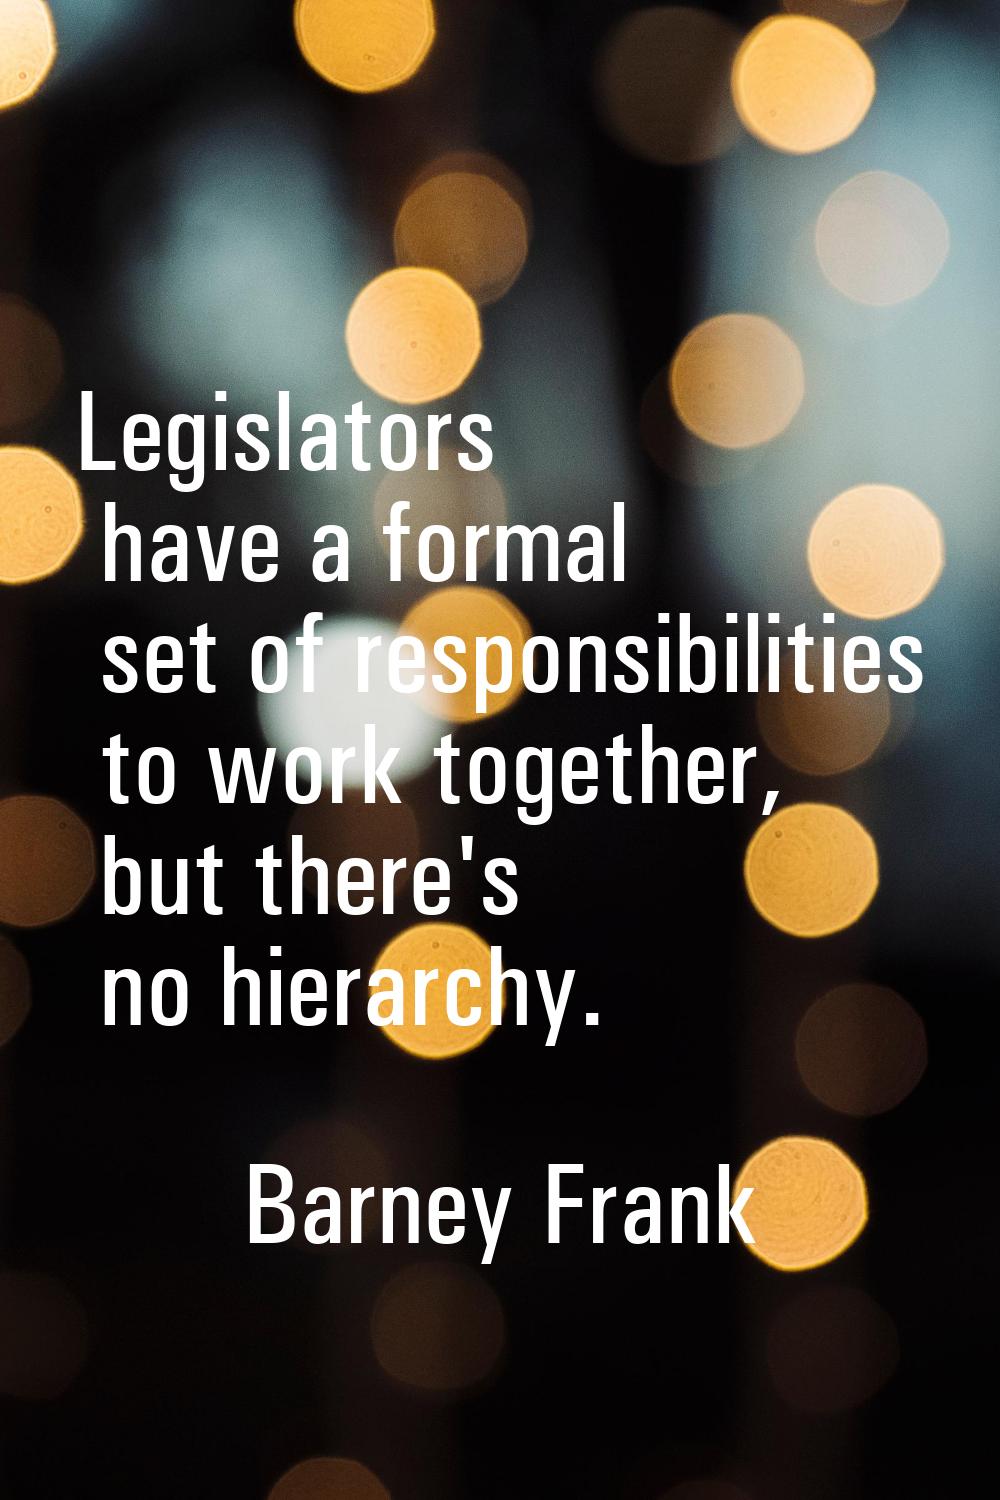 Legislators have a formal set of responsibilities to work together, but there's no hierarchy.